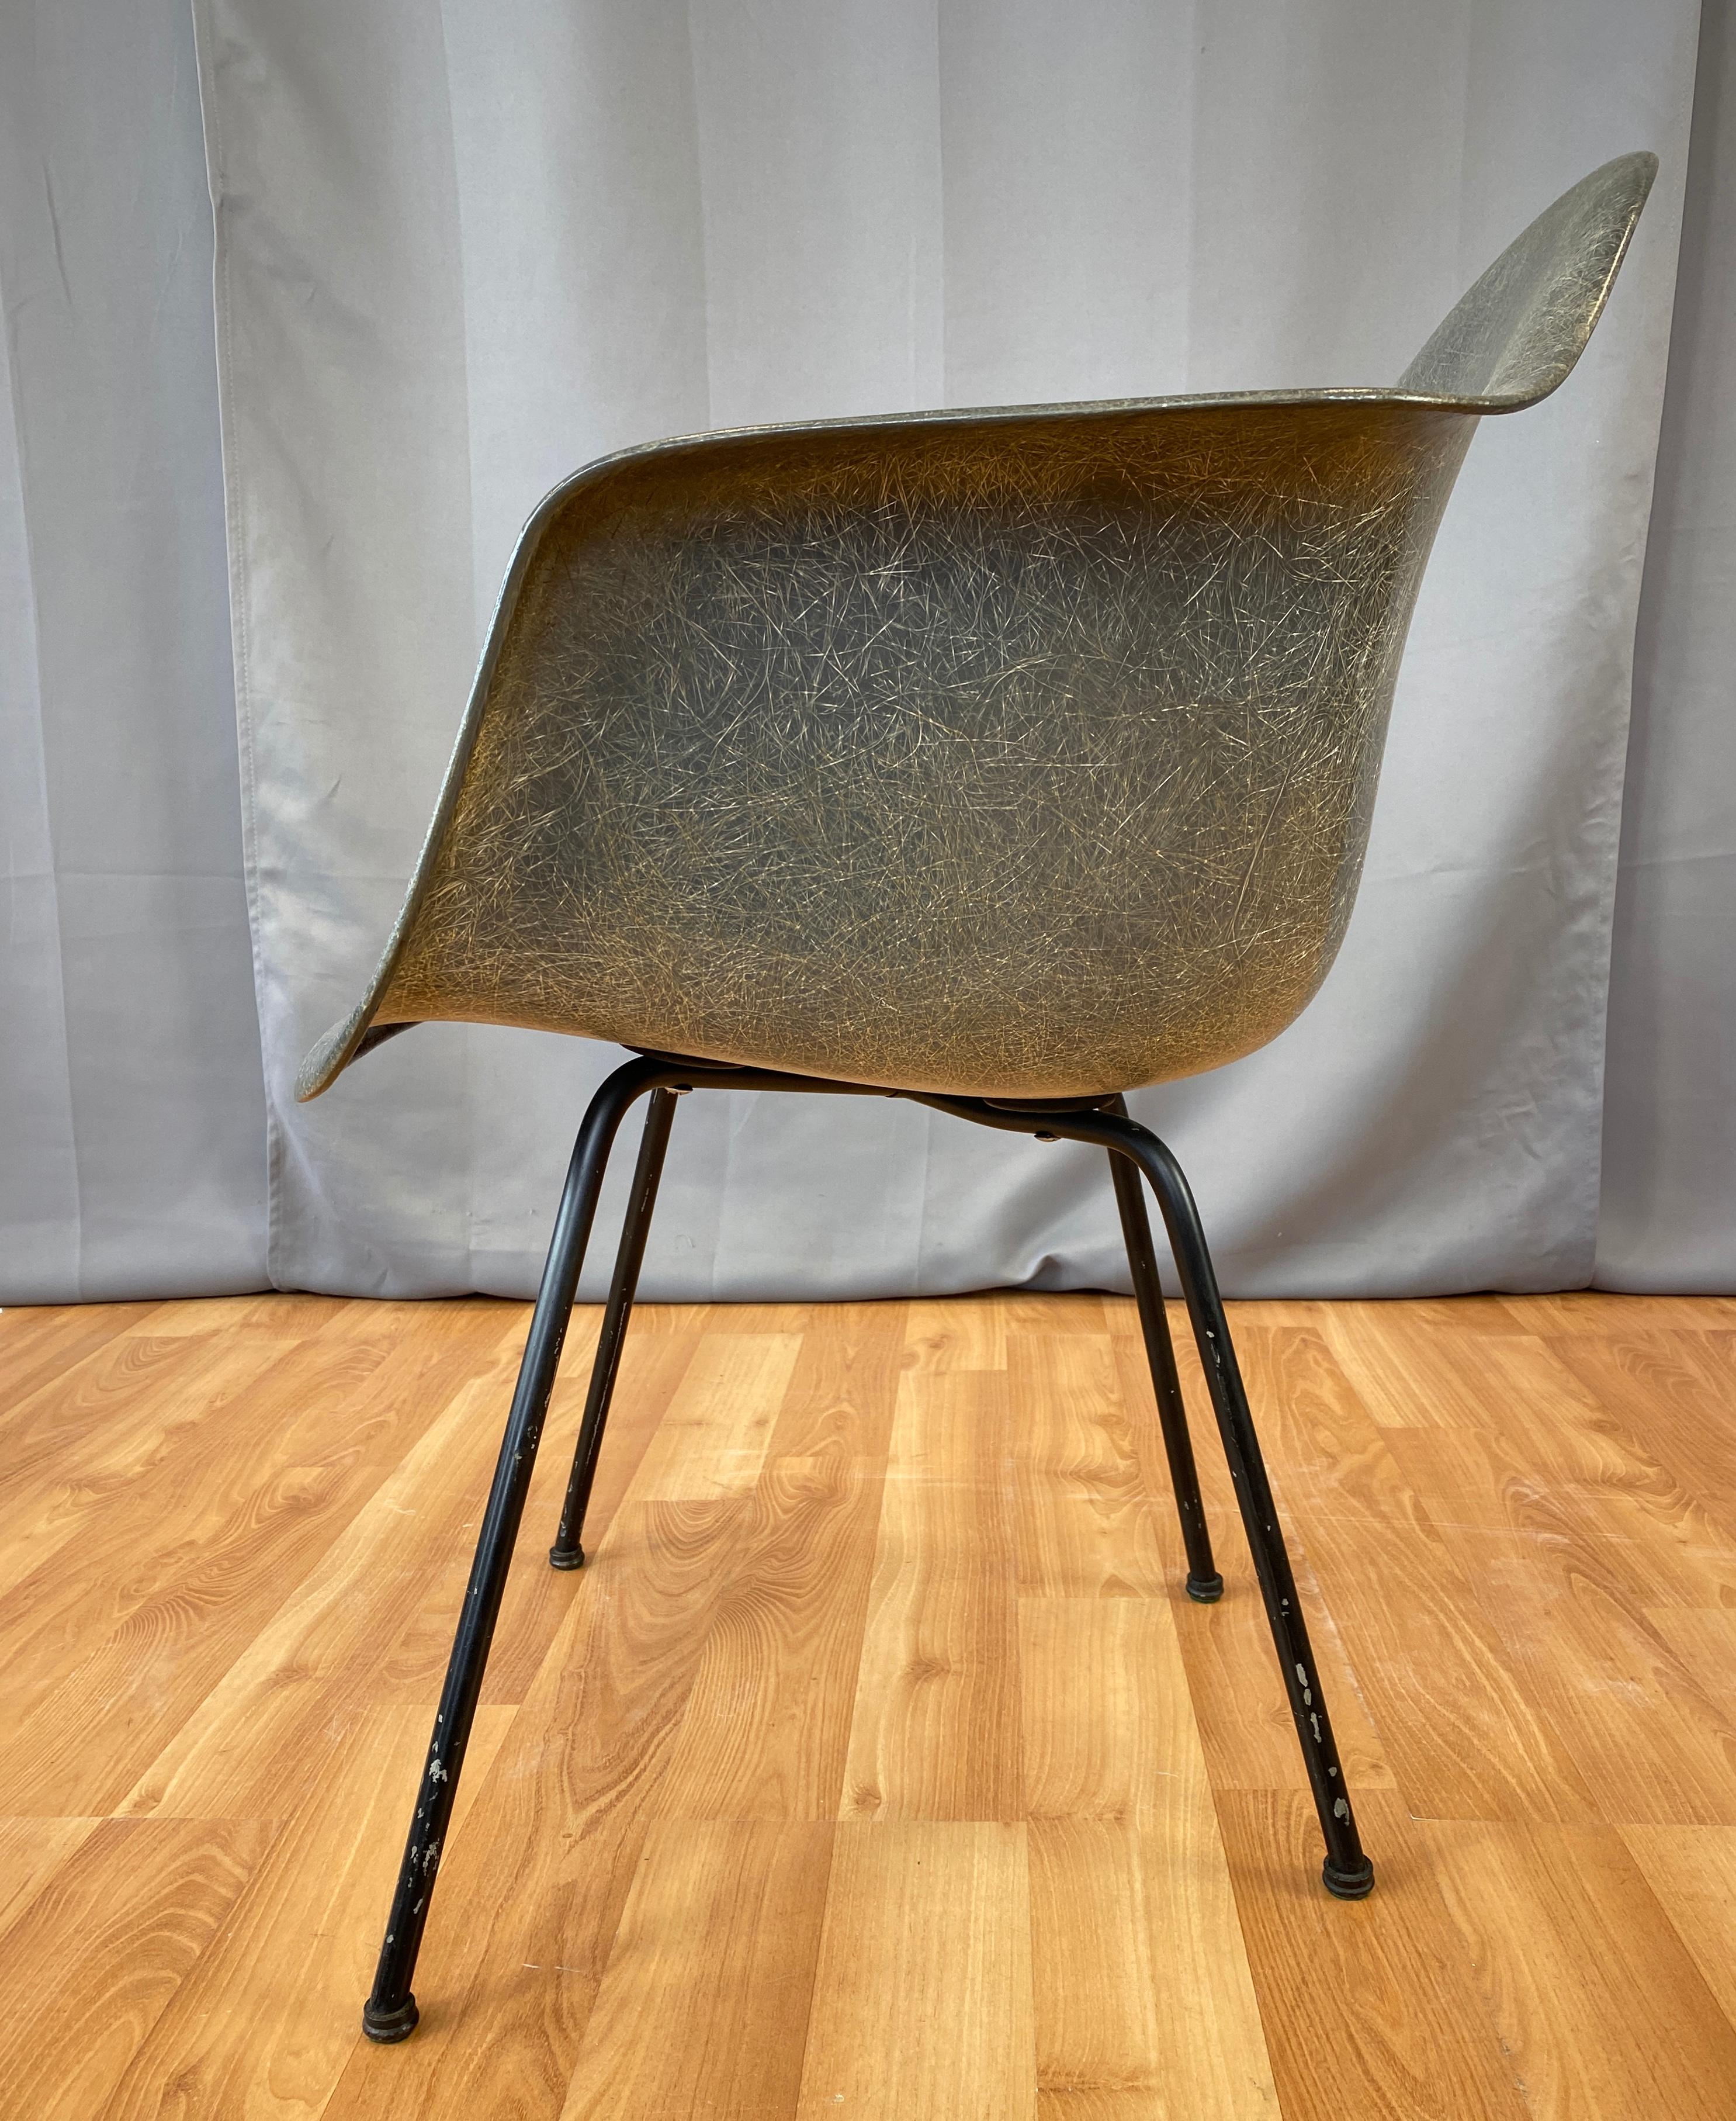 Mid-20th Century 1st Generation Zenith Plastic Rope Edge Chair, Charles Eames for Herman Miller A